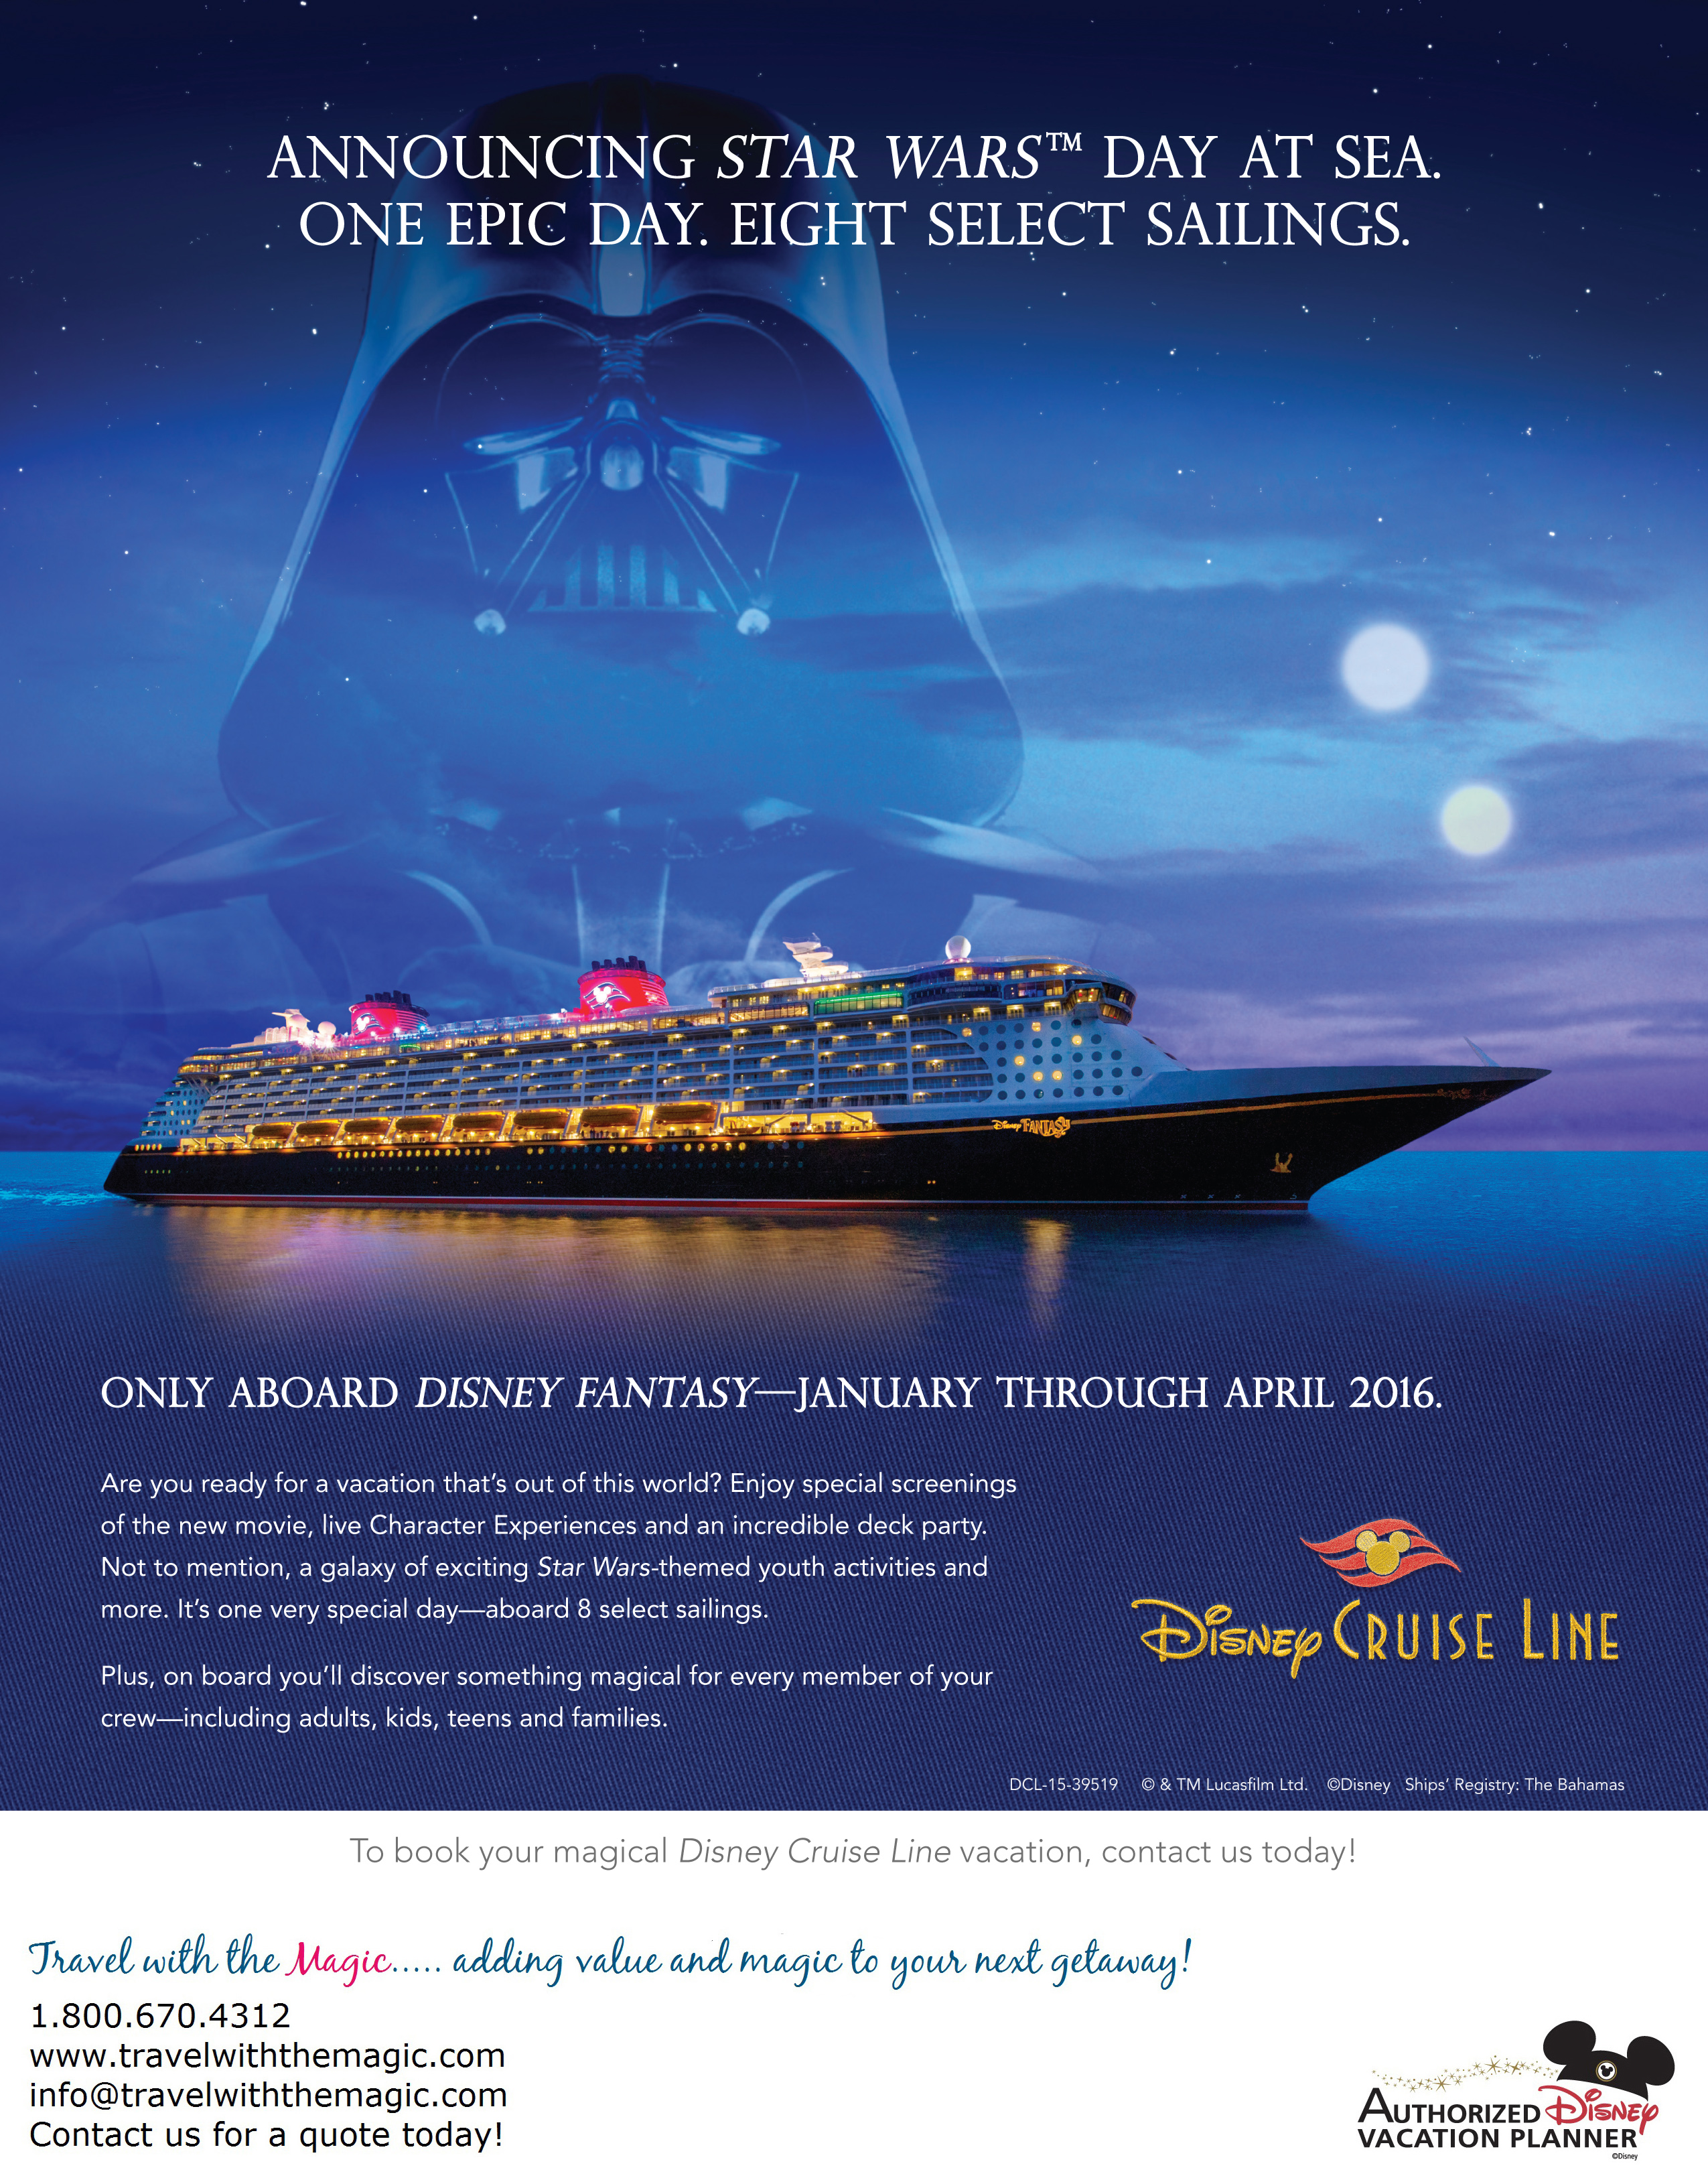 Star Wars Day at Sea coming in 2016 